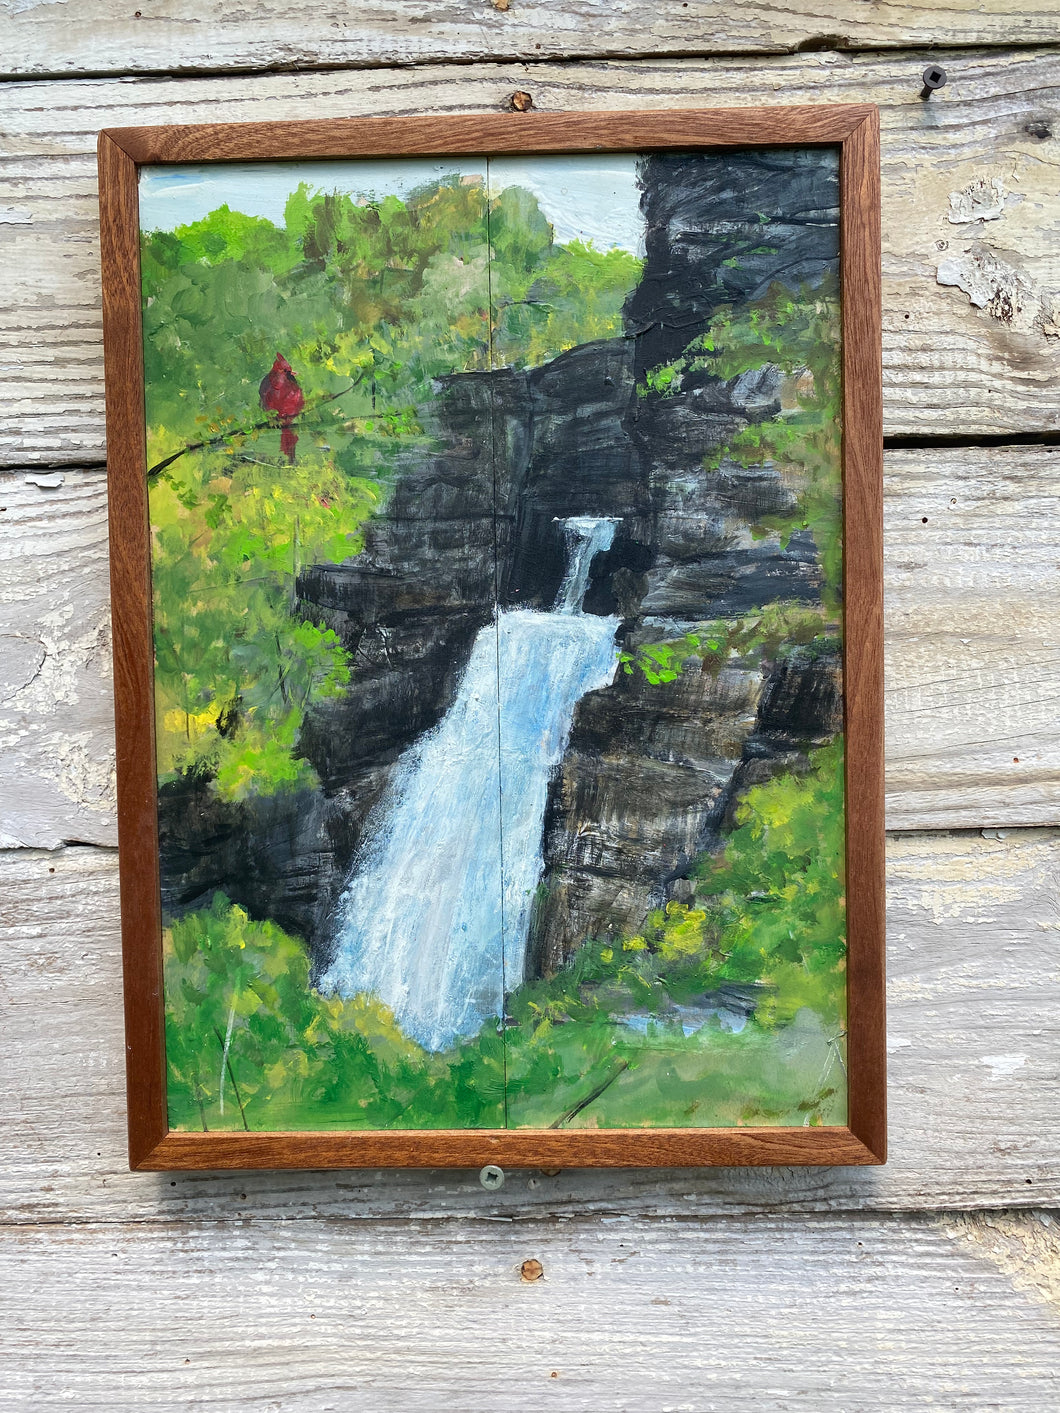 Cardinal at Linville Falls,NC. Original painting on reclaimed wood